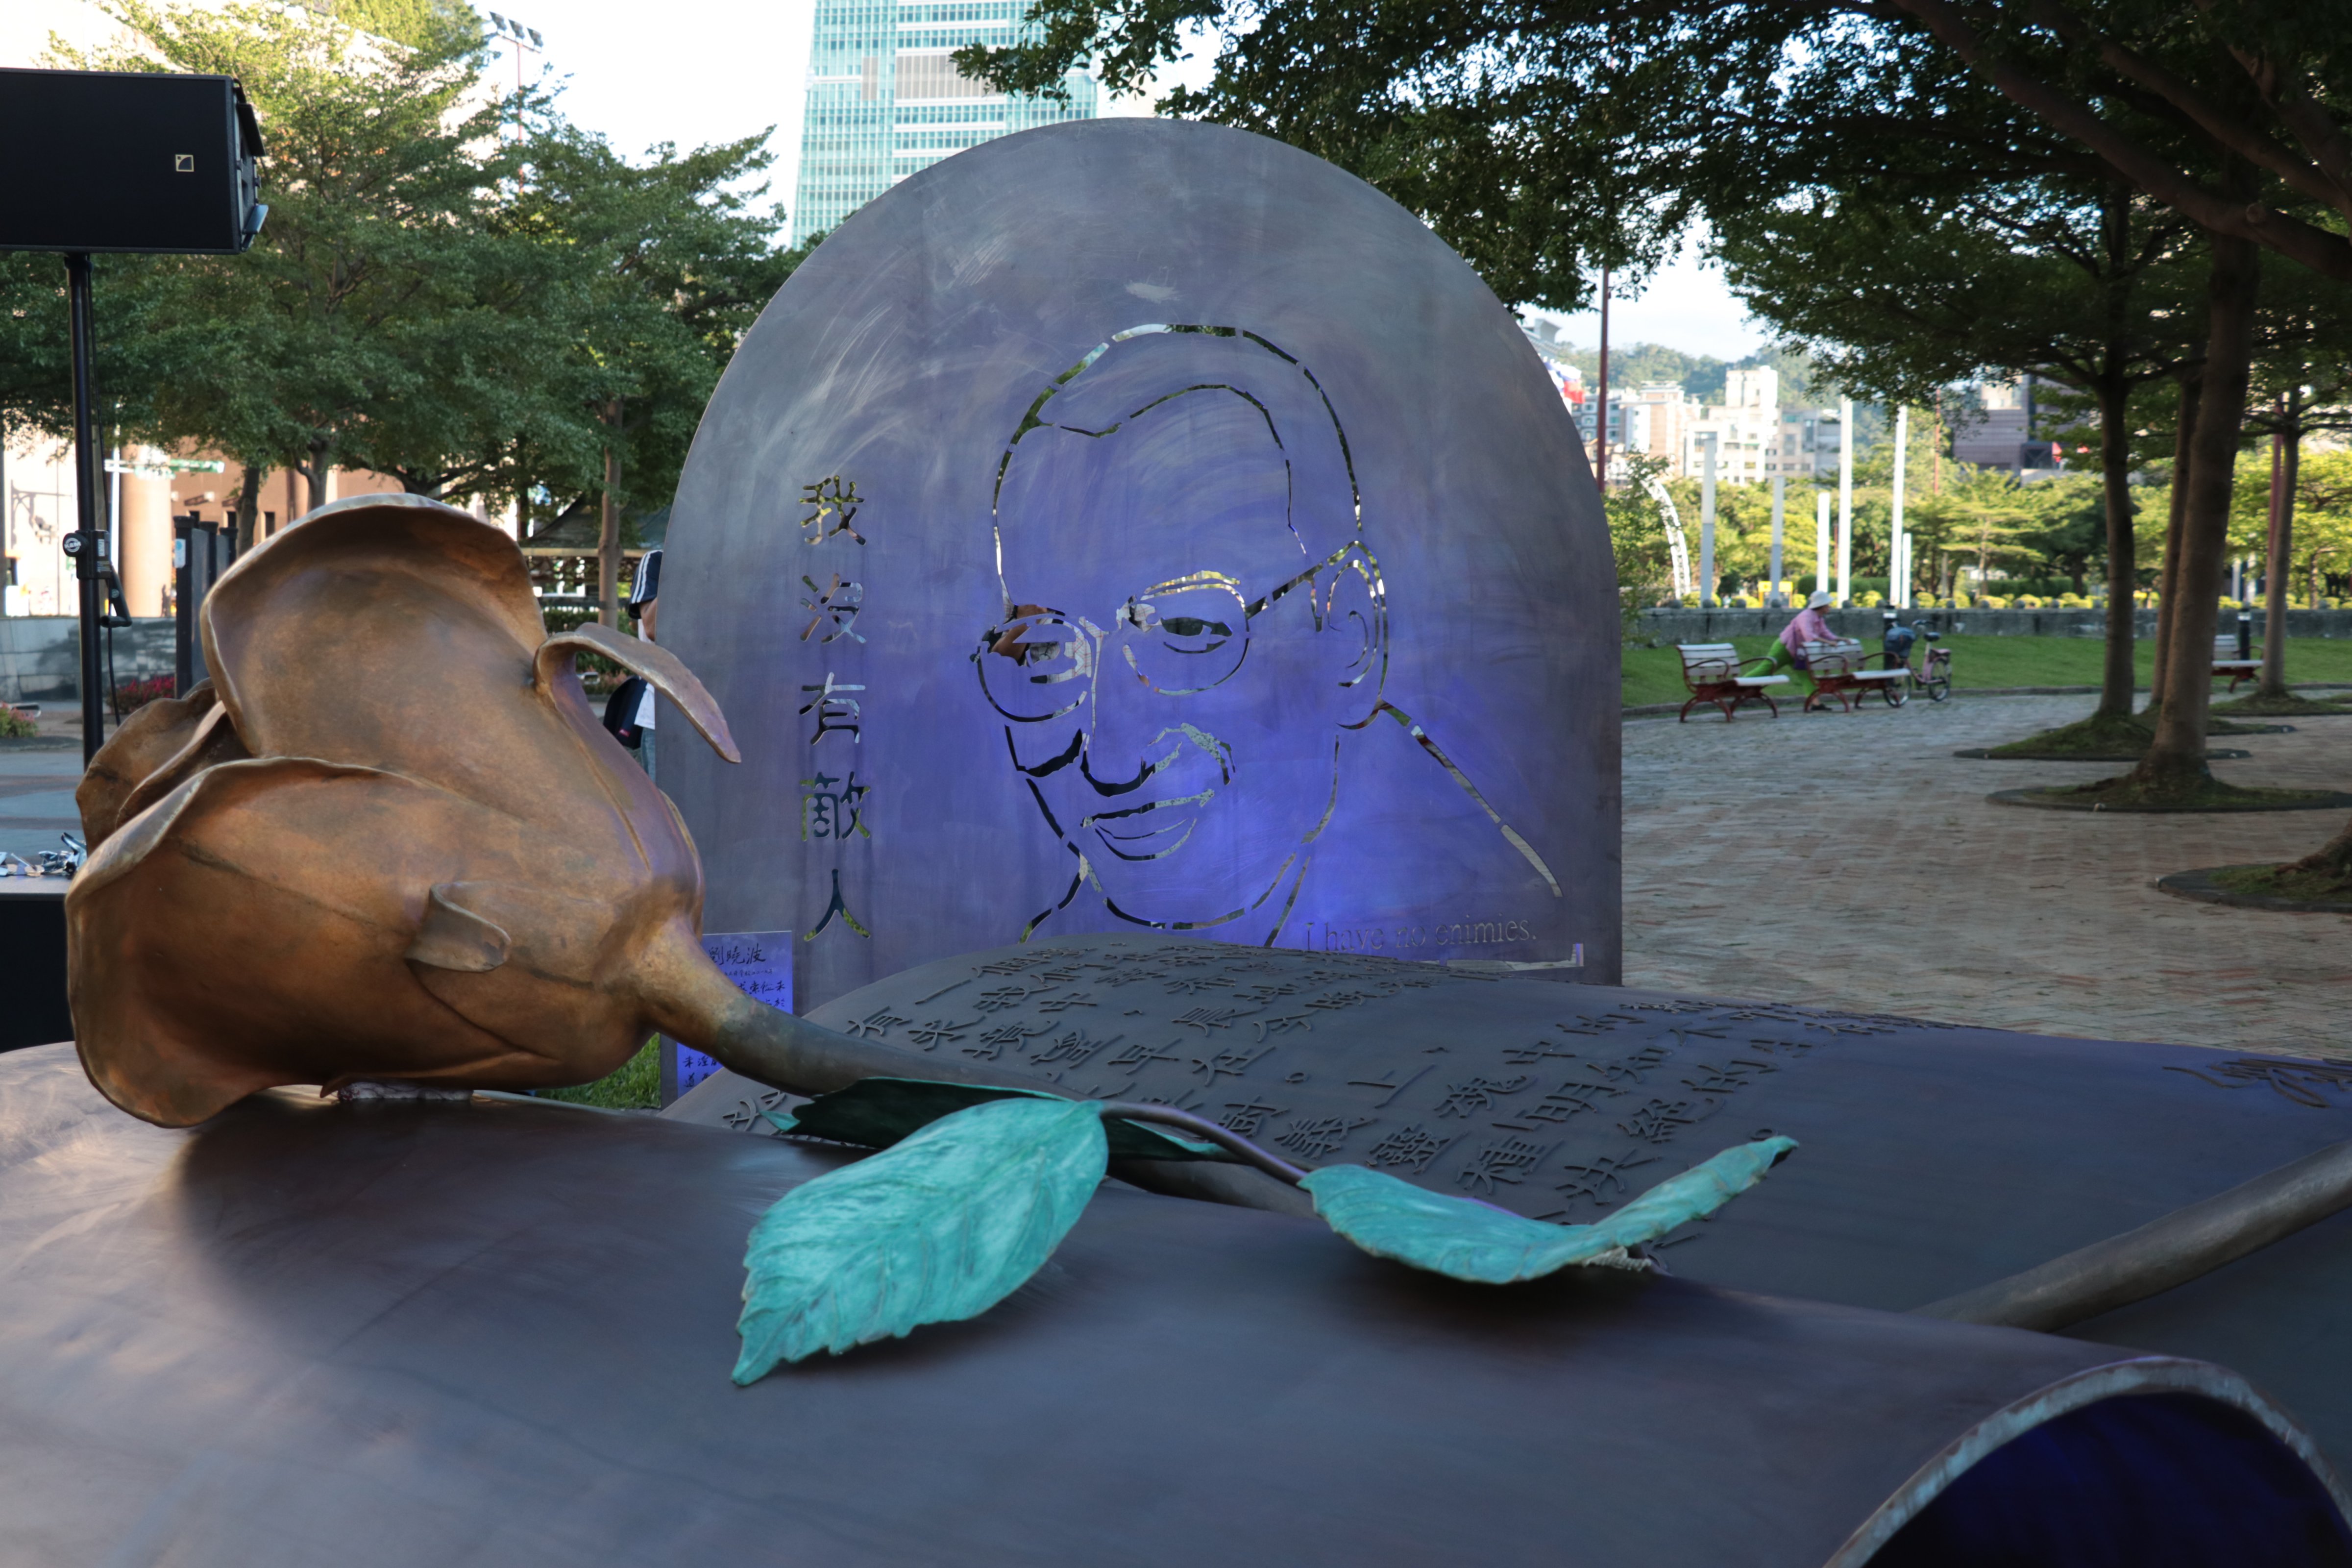 'I Have No Enemies,' a three-part sculpture dedicated to the late Chinese Nobel Peace Prize Laureate Liu Xiaobo, is unveiled in Taipei, Taiwan on the one year anniversary of his death on Jul. 13 2018 (Wen-Yee Lee—TIME)